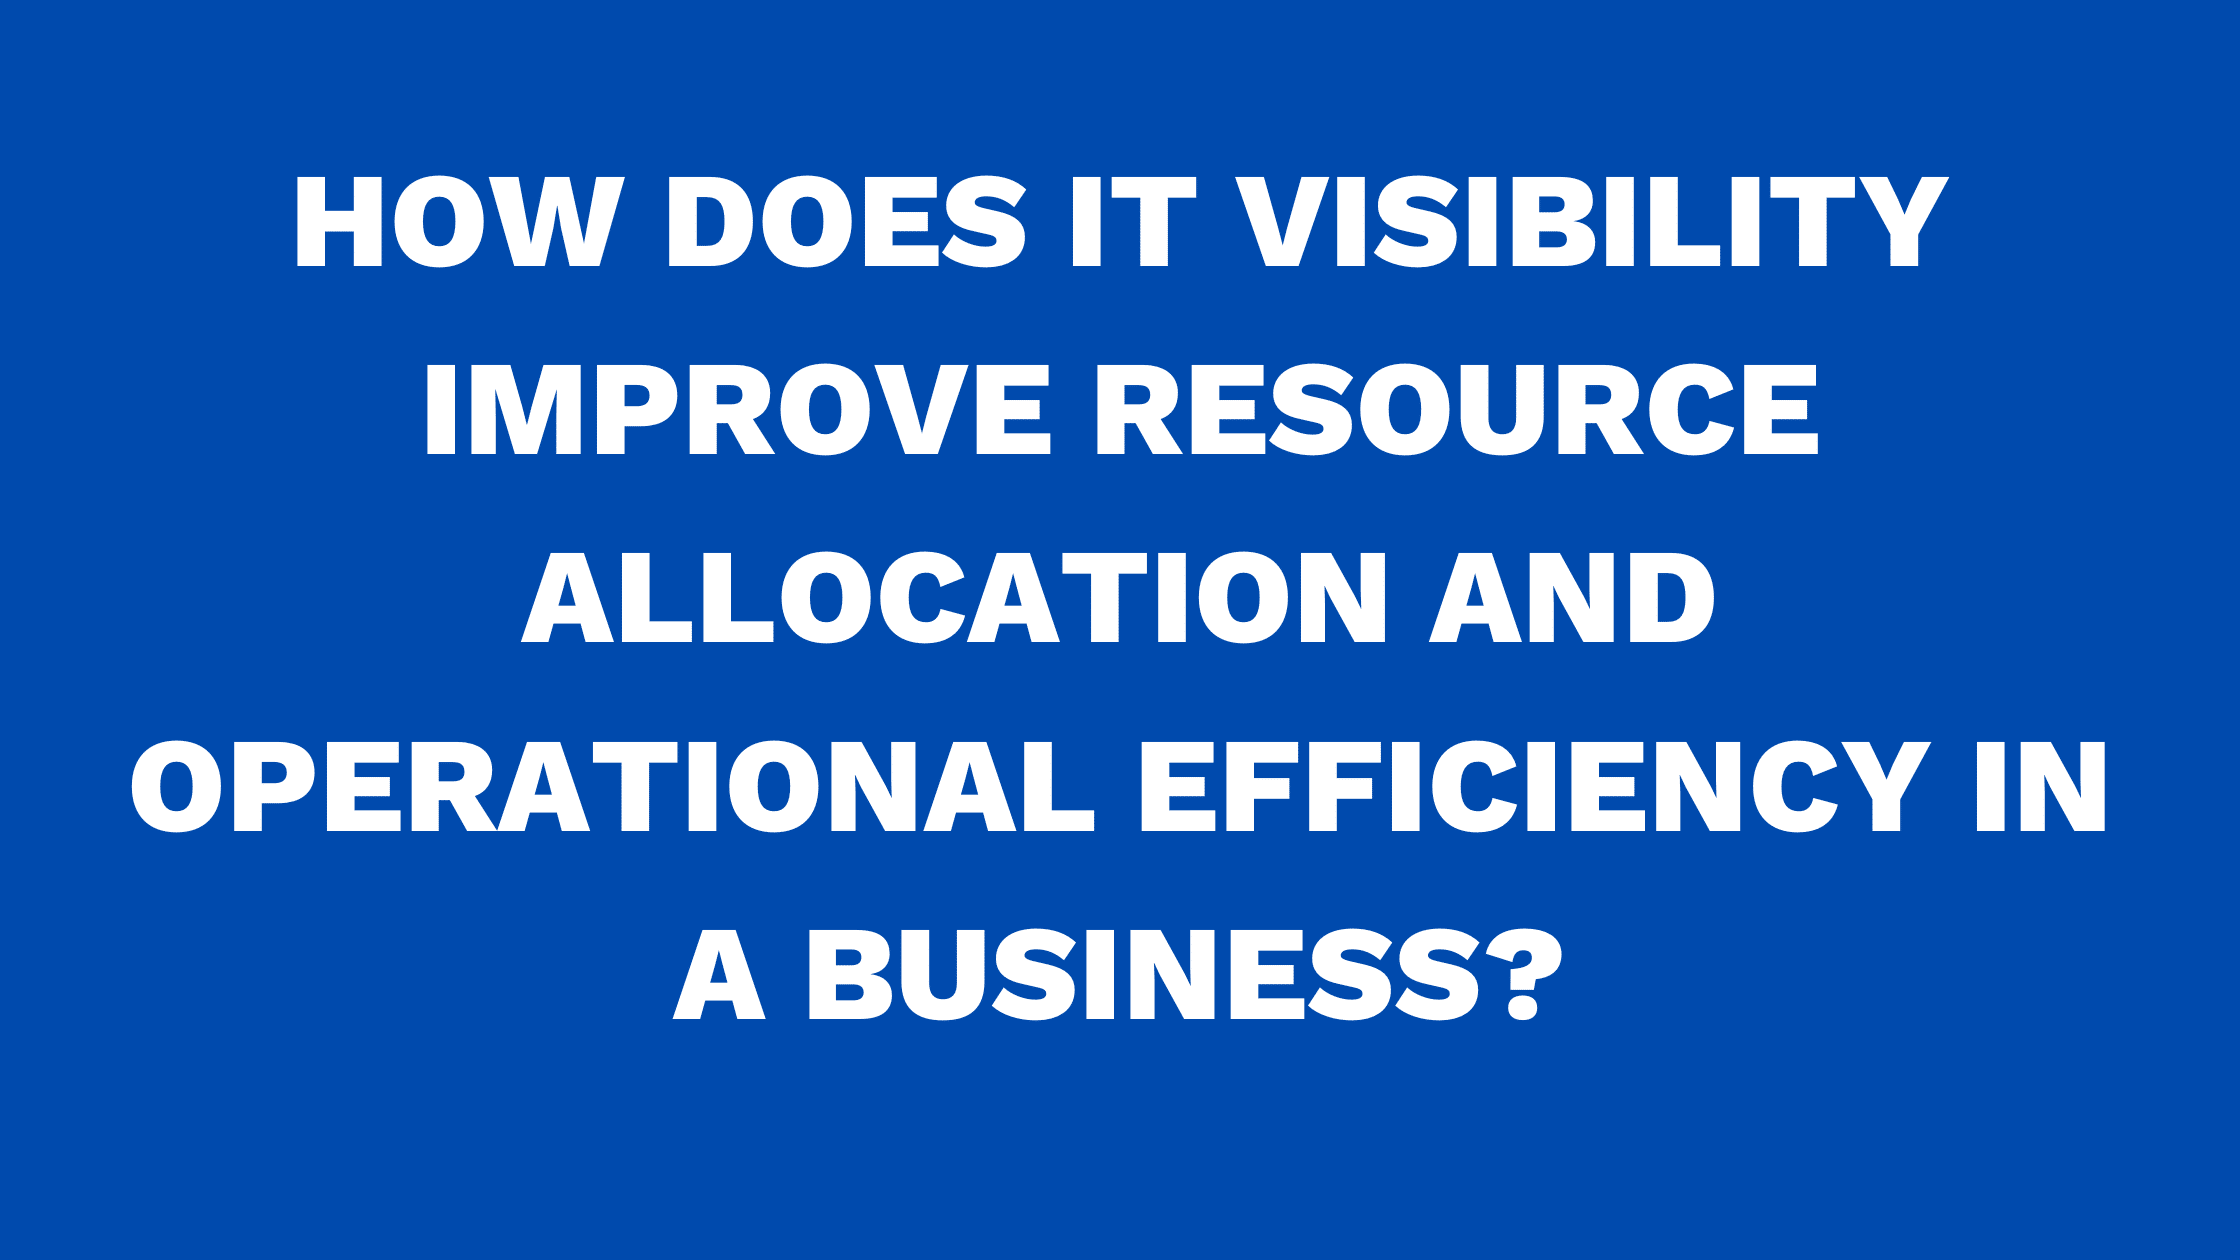 IT visibility improve resource allocation and operational efficiency